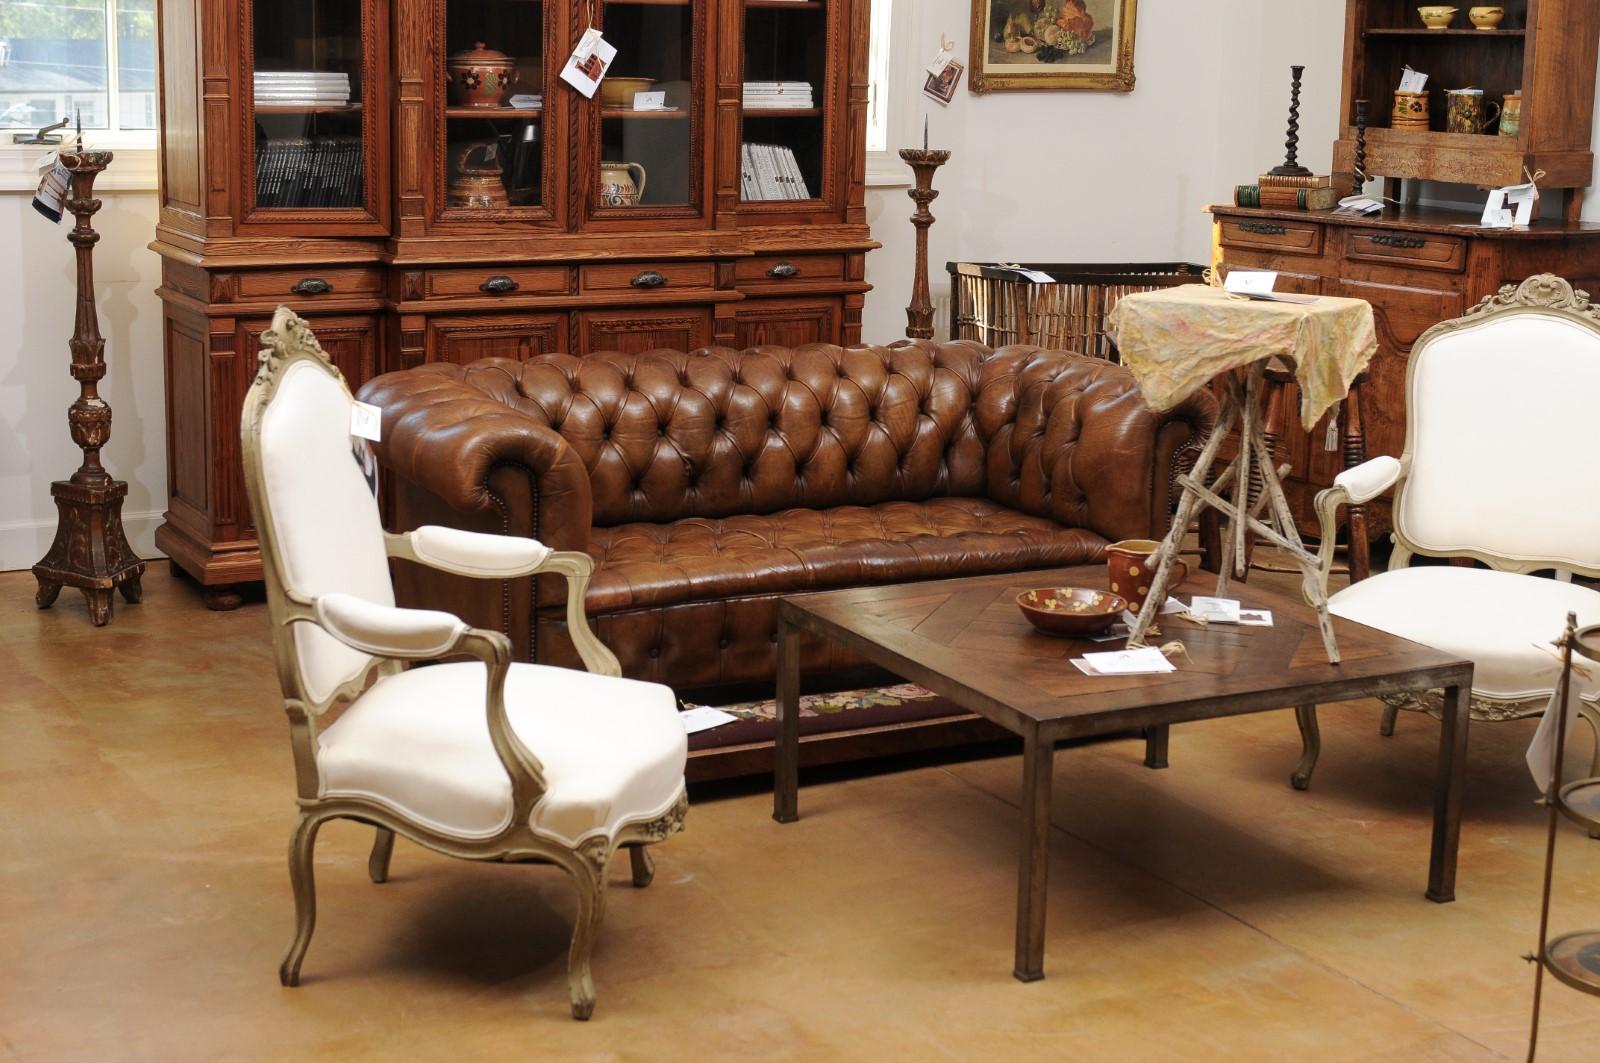 A French tufted leather Chesterfield sofa with nailhead trim from the late 19th century. This French canapé features the traditional shape of Chesterfield sofas with its straight back that was designed to allow gentlemen to sit upright, and its